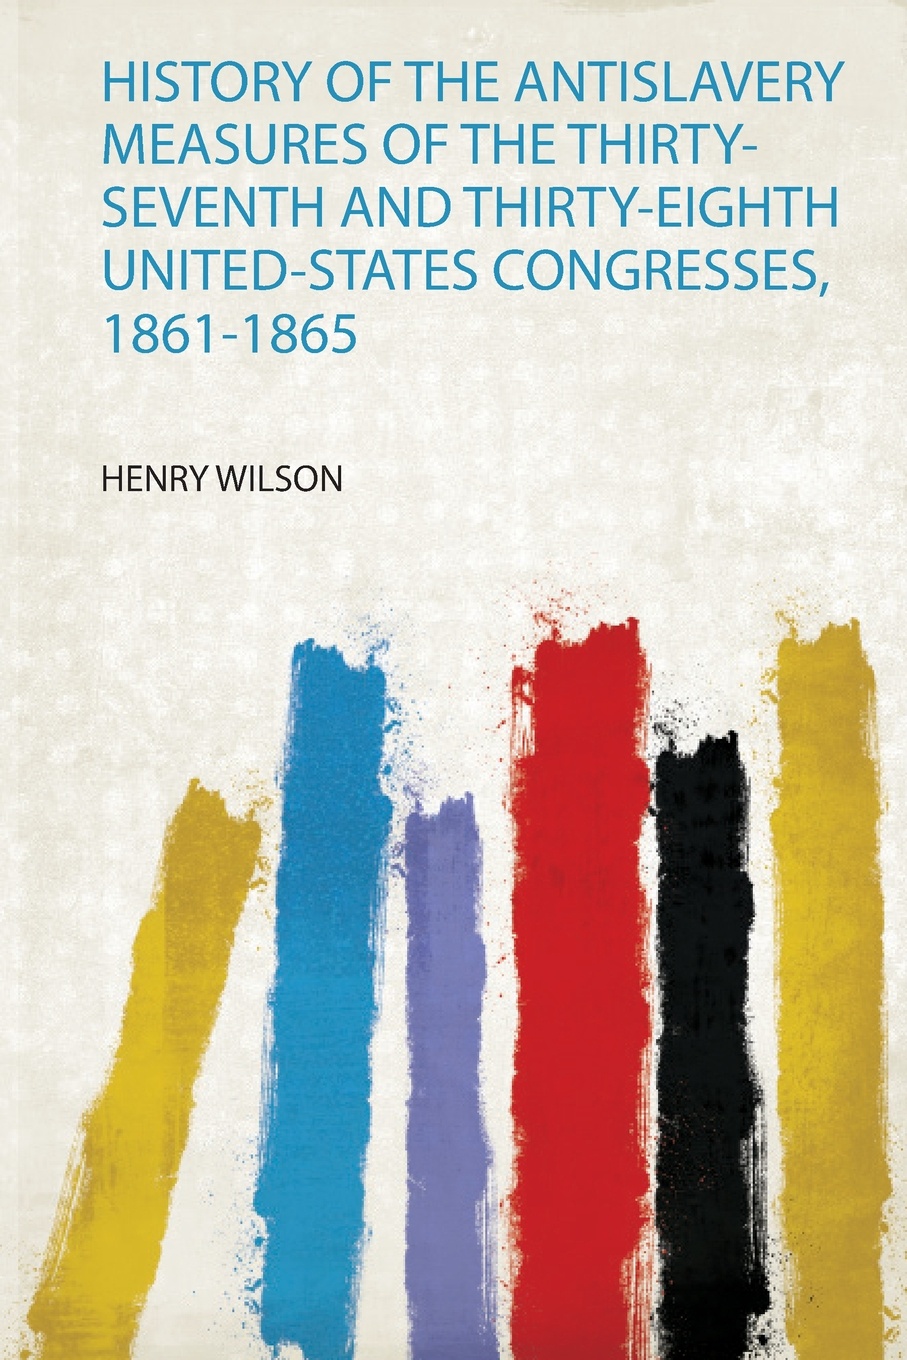 History of the Antislavery Measures of the Thirty-Seventh and Thirty-Eighth United-States Congresses, 1861-1865